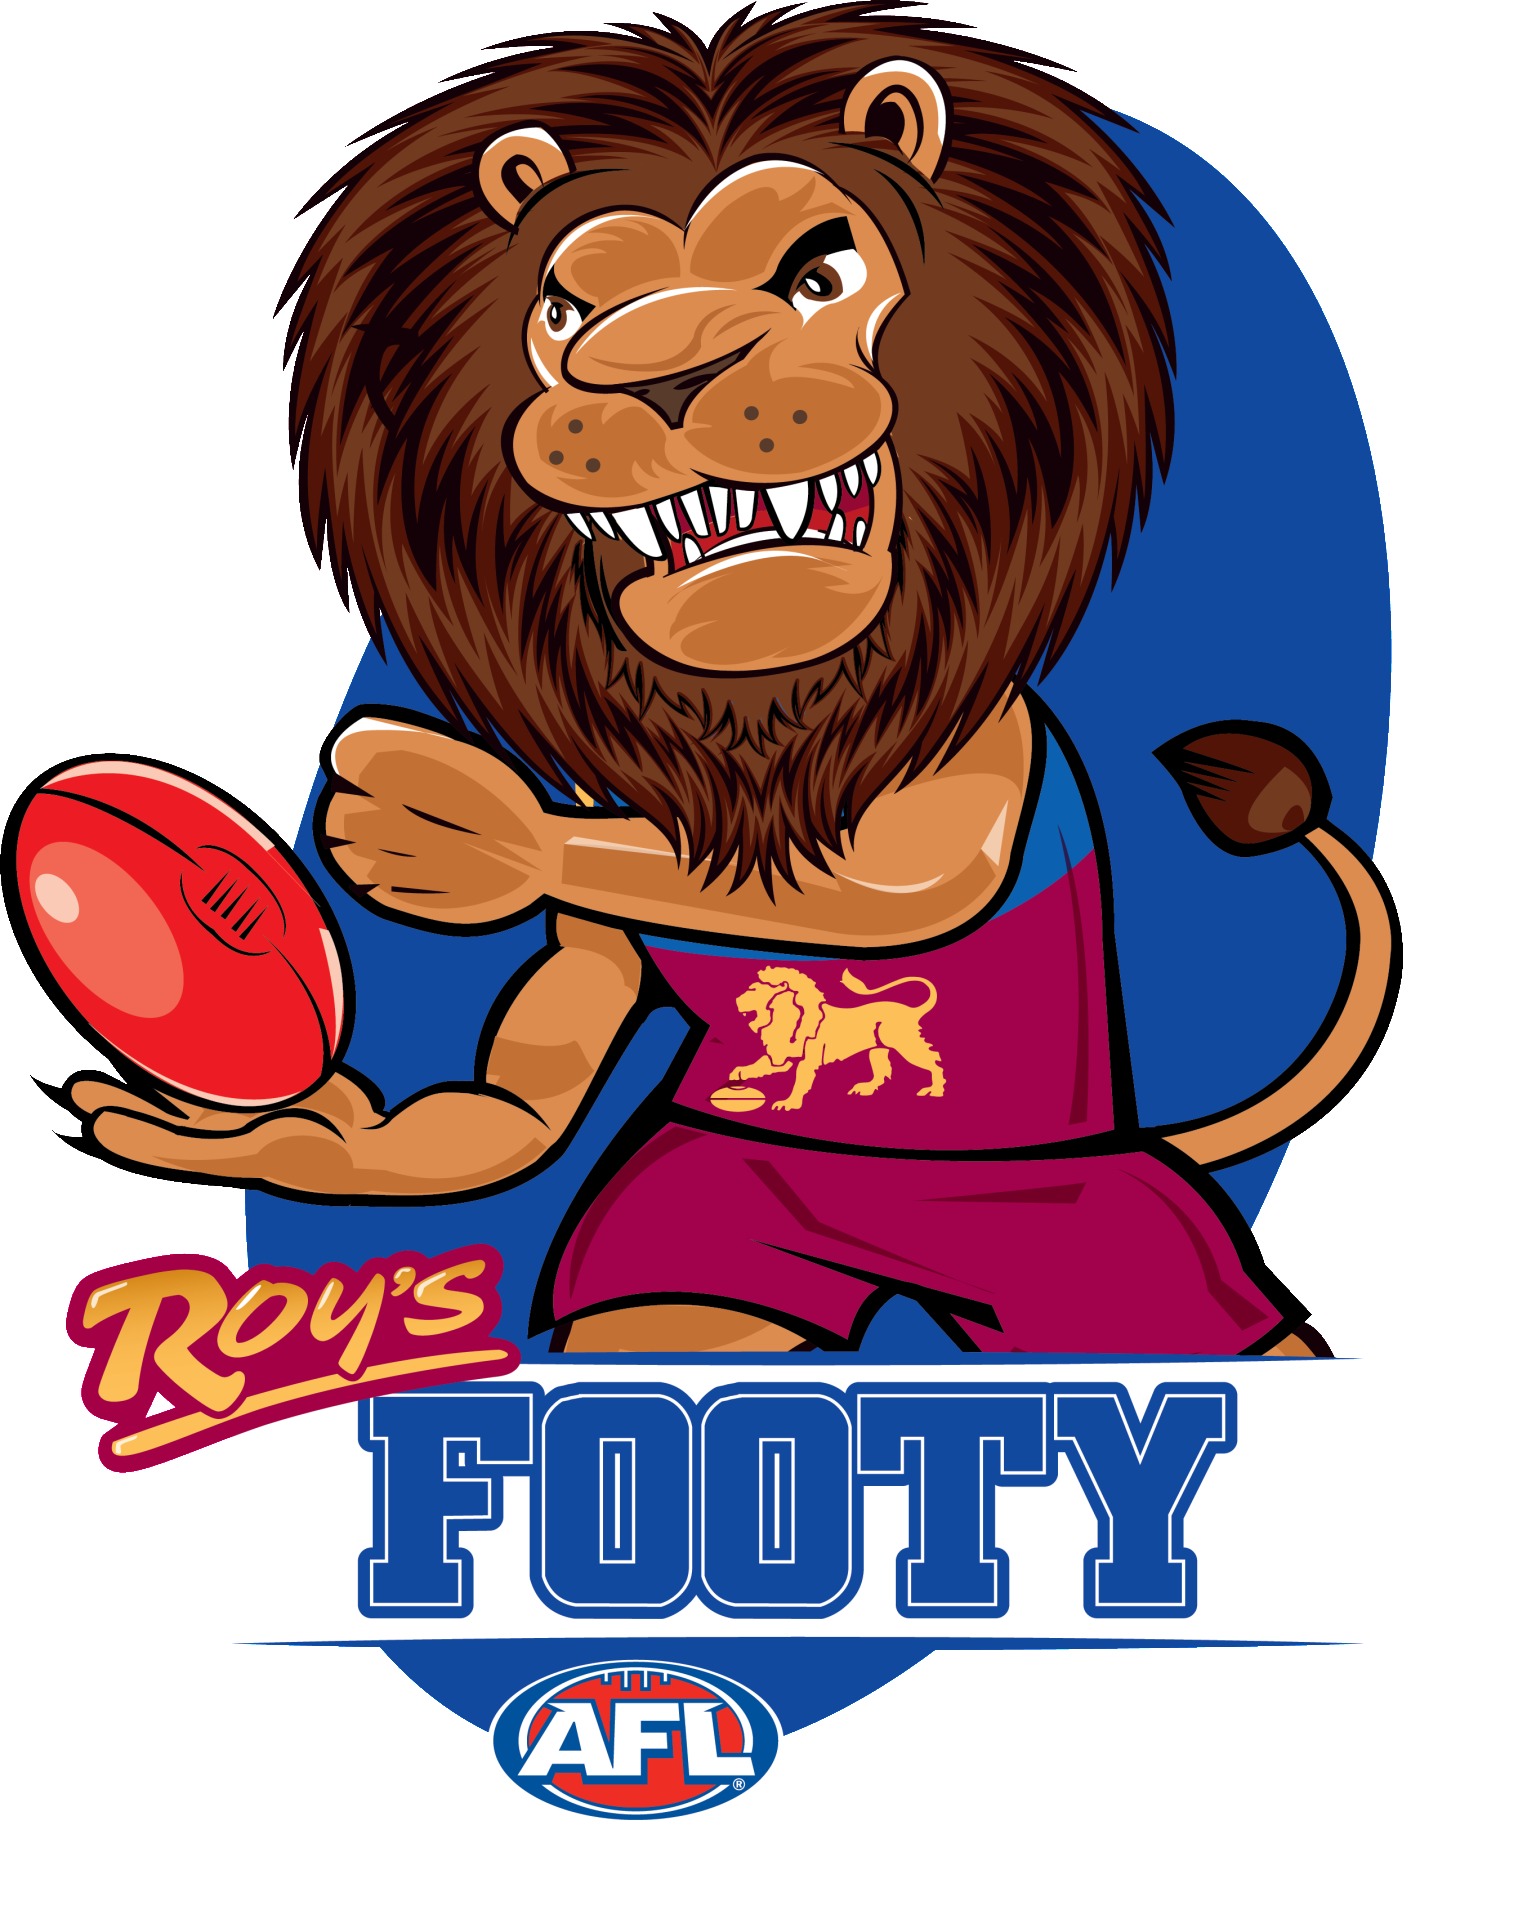 Image result for roys footy